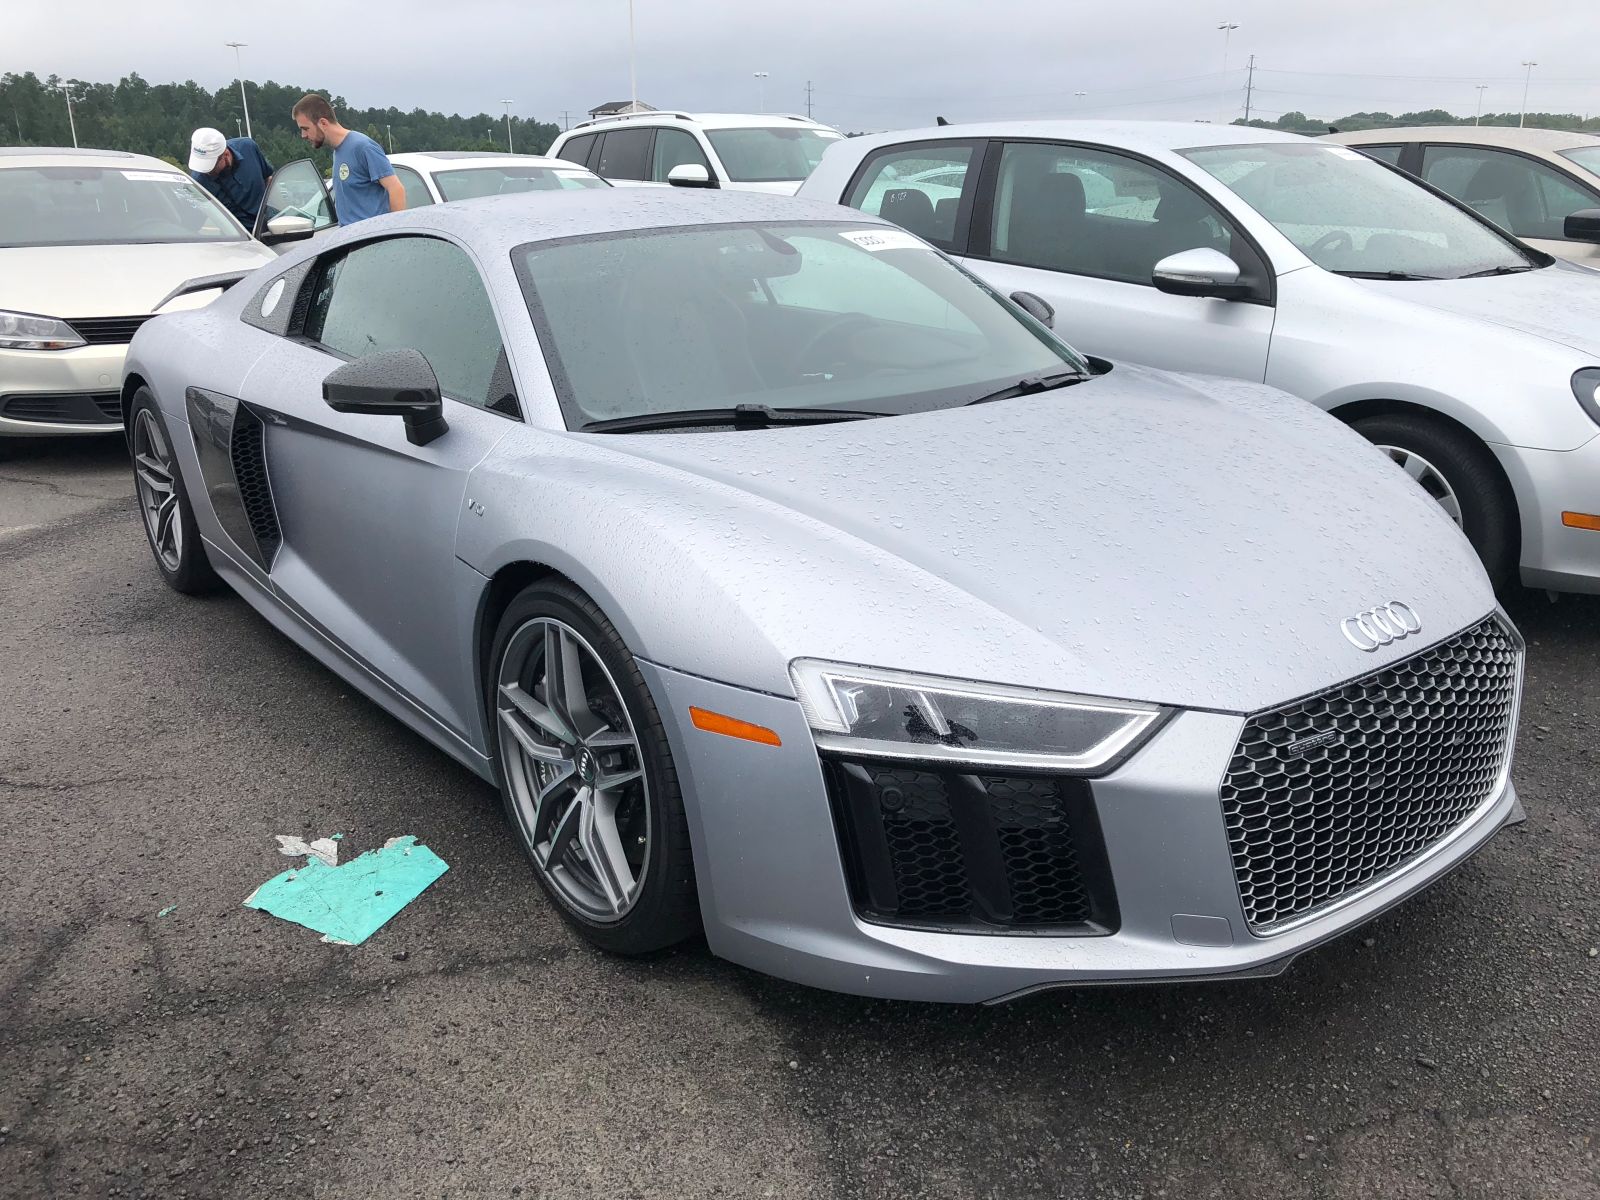 R8 for your time